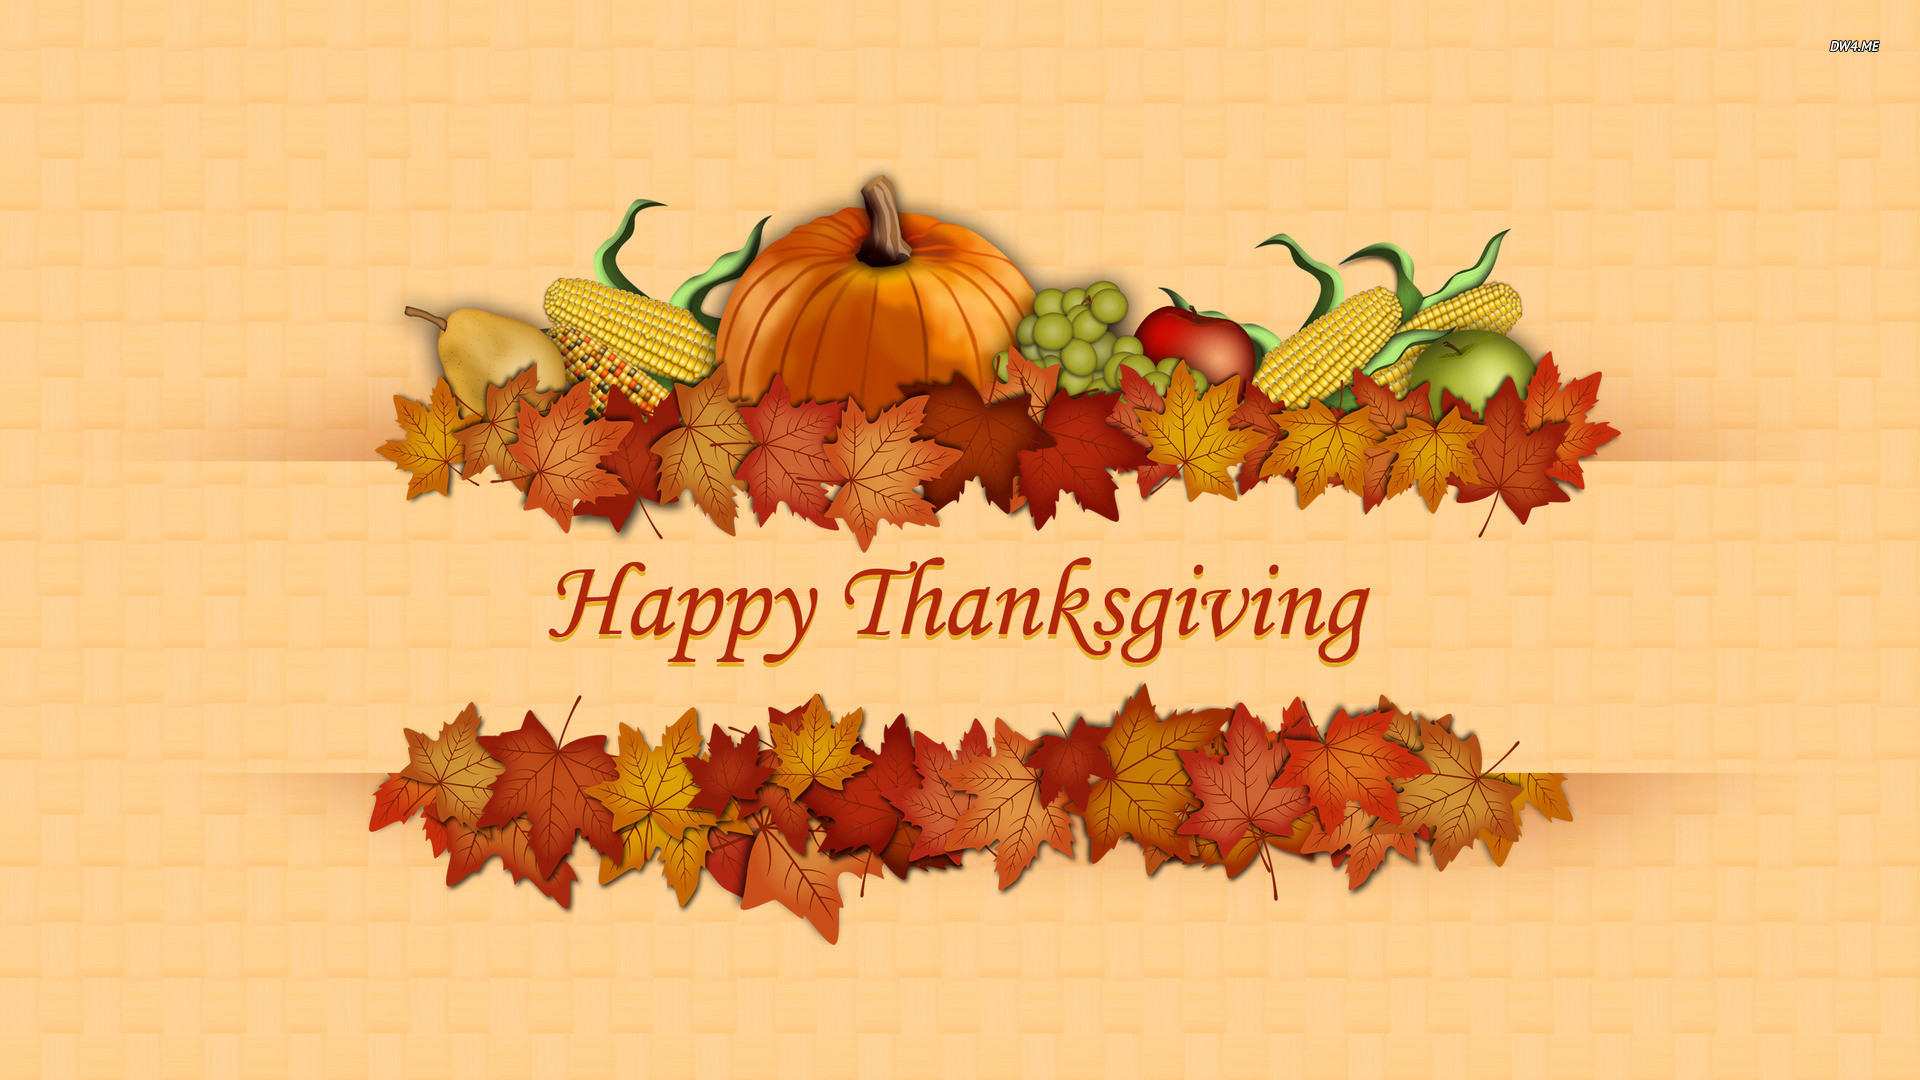 Happy Thanksgiving Wallpaper (70+ images)